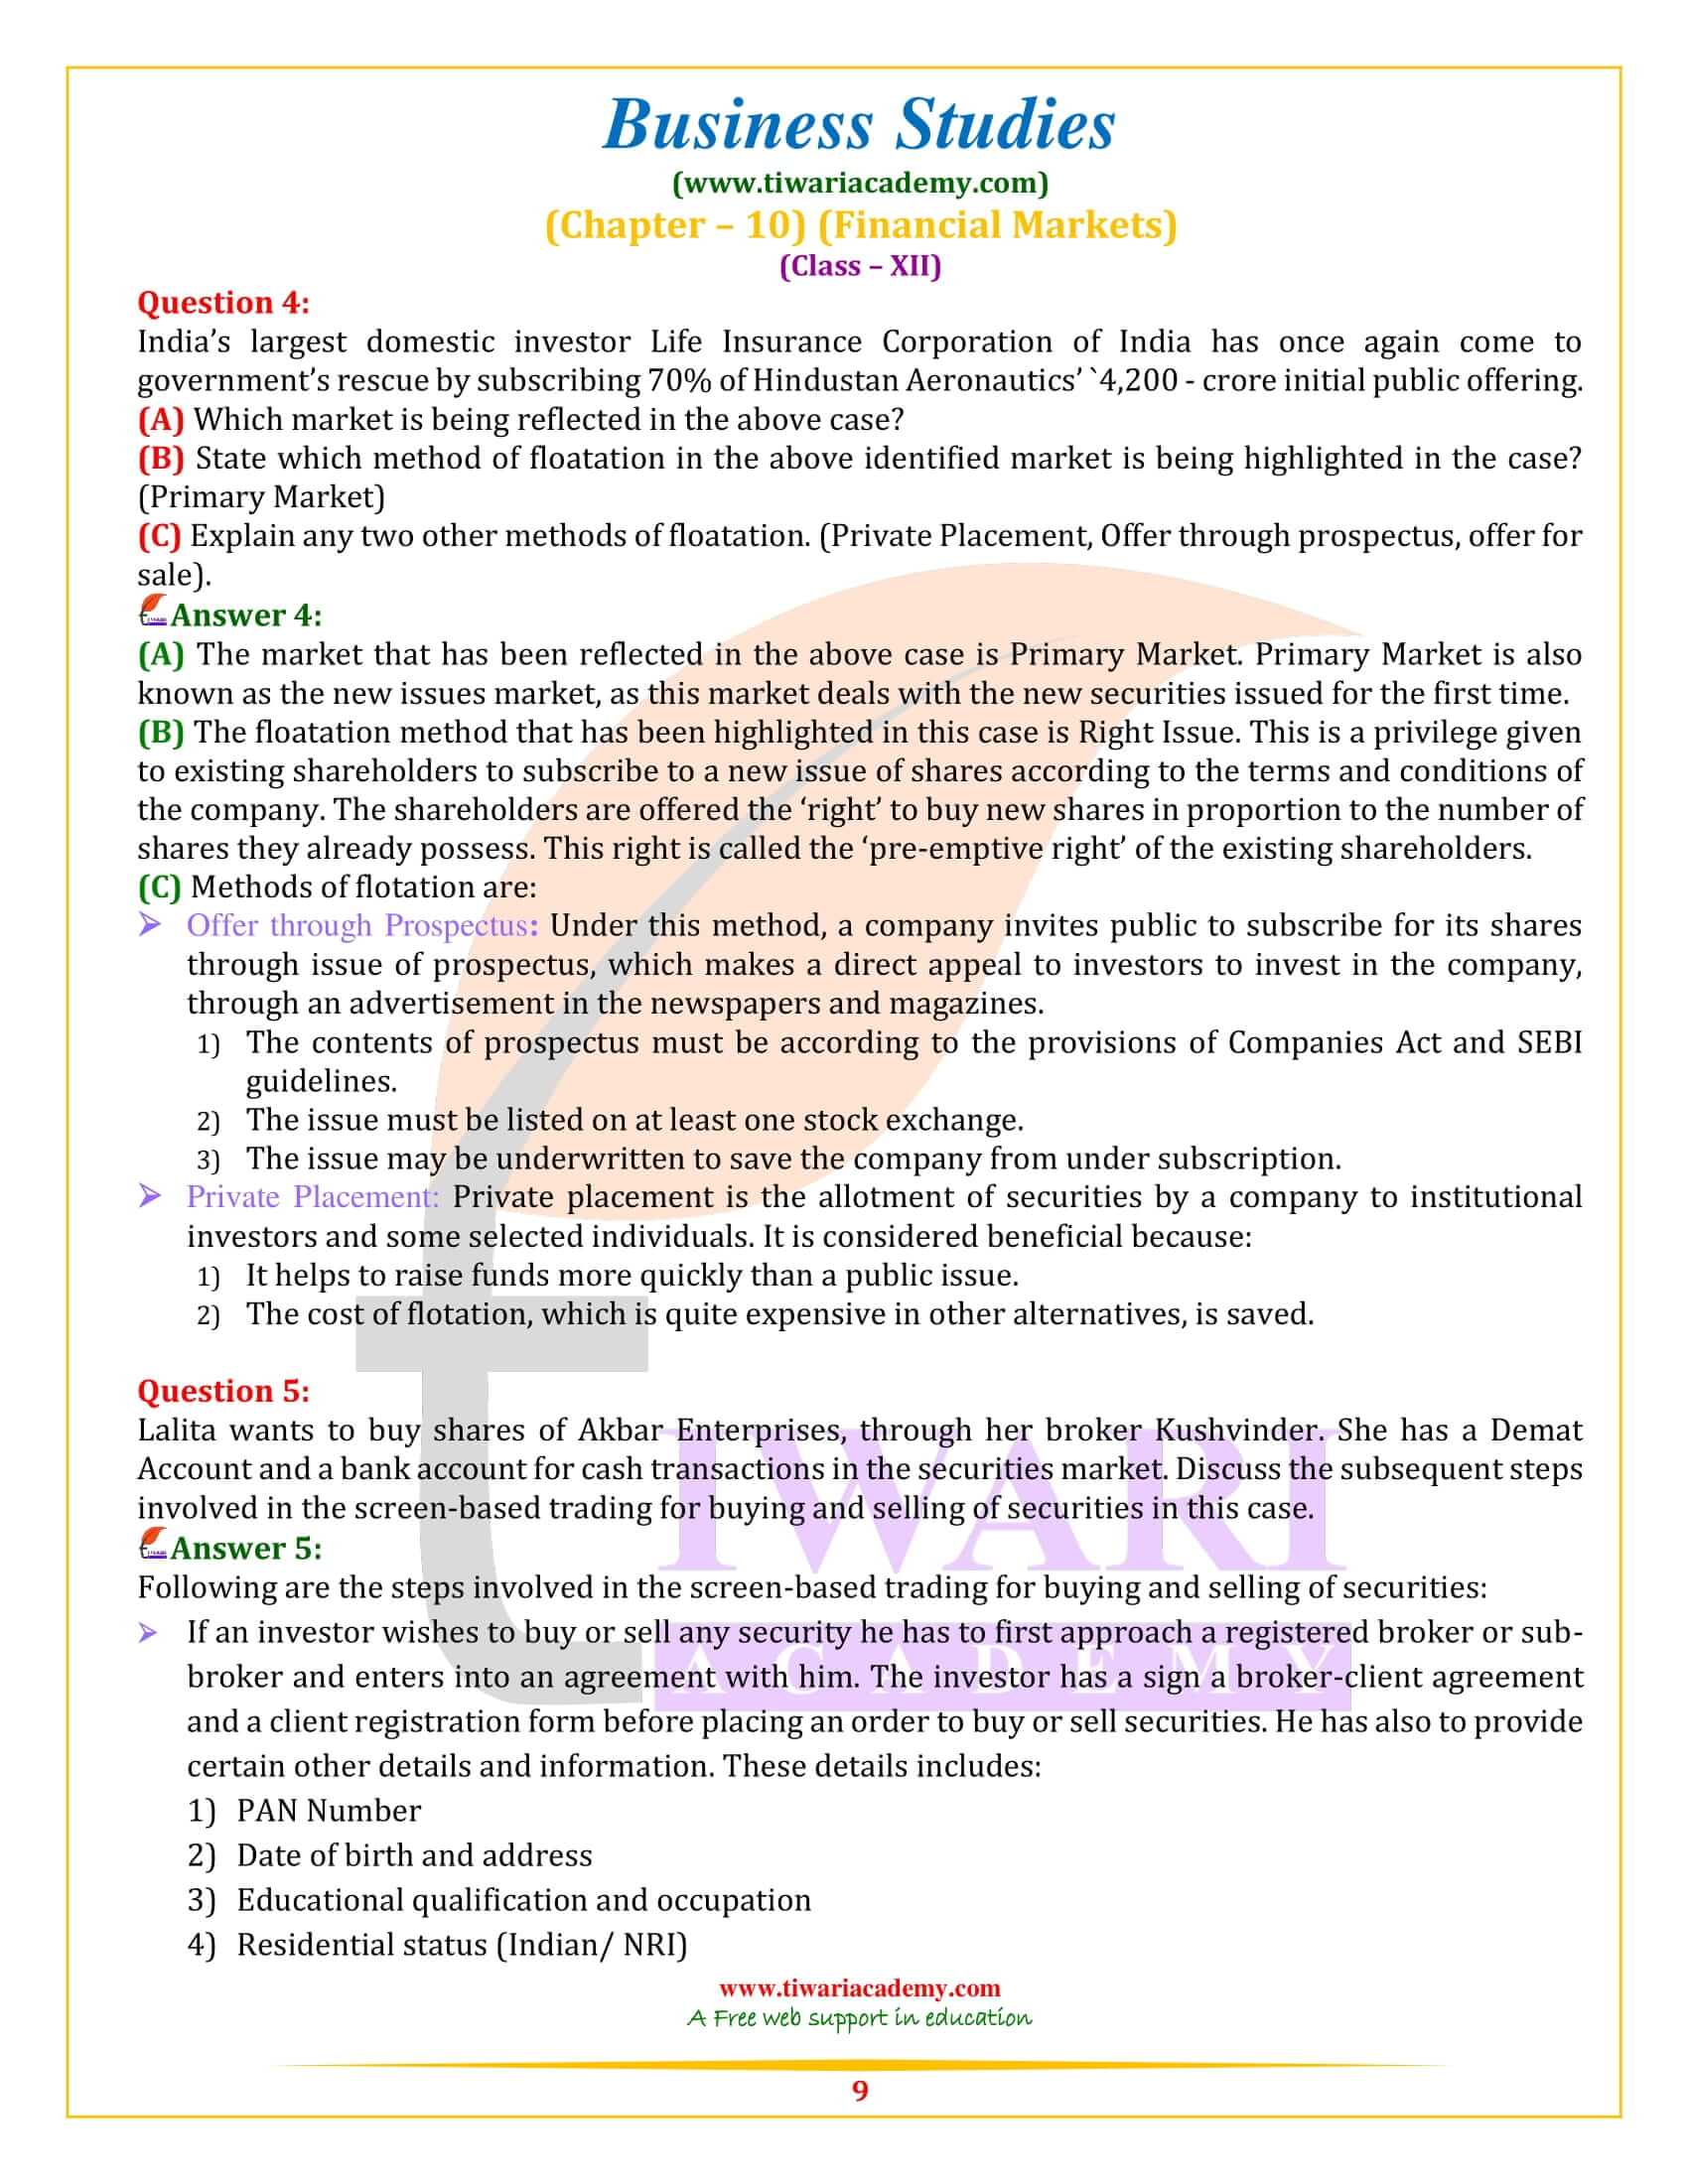 NCERT Solutions for Class 12 Business Studies Chapter 10 updated